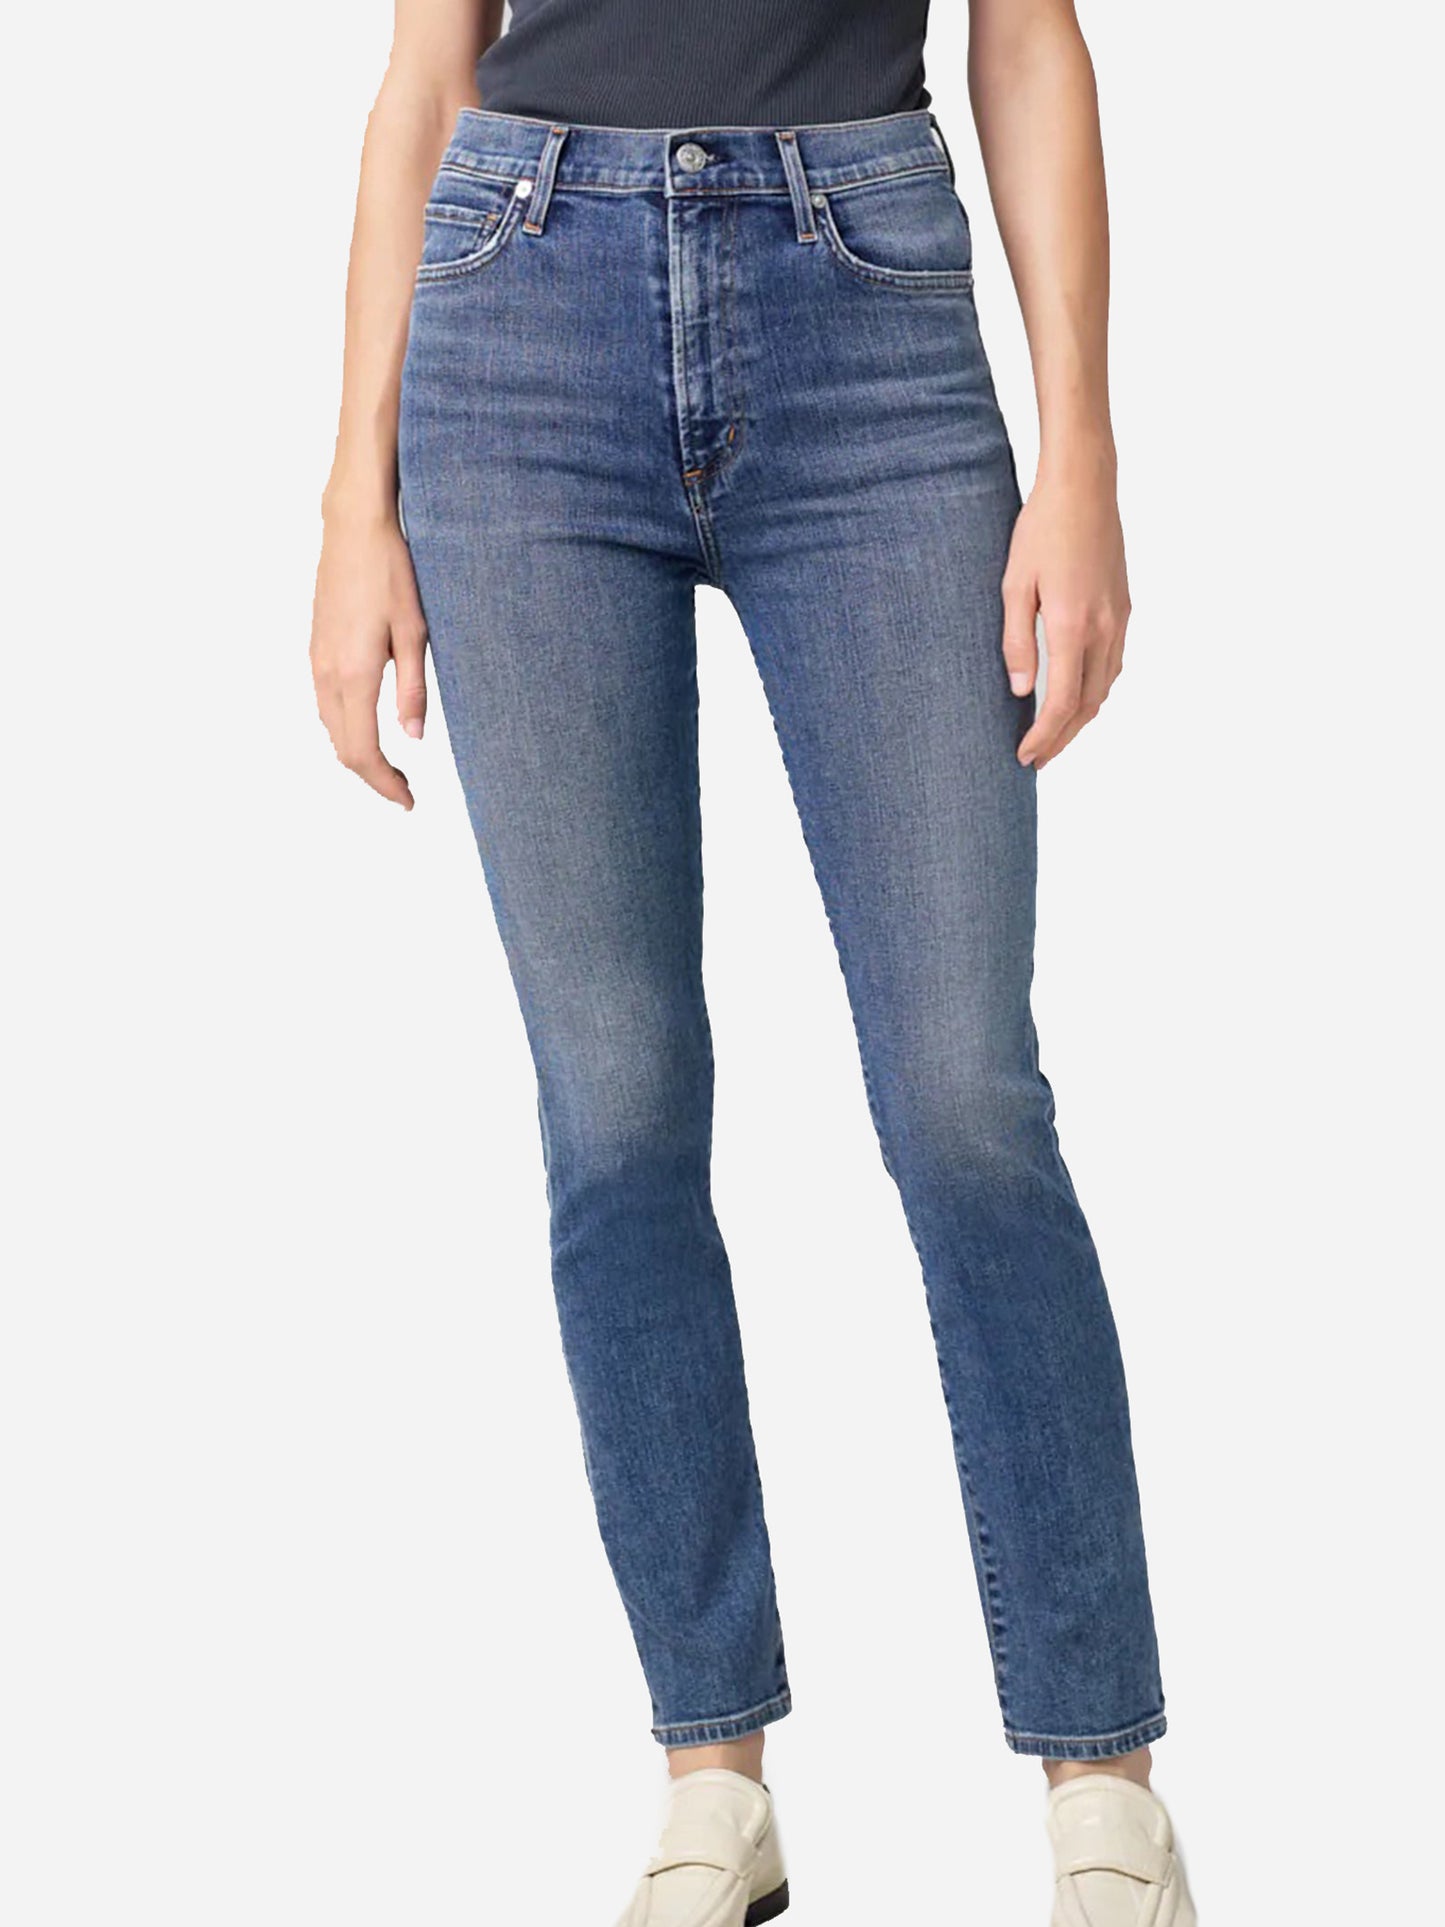 Citizens Of Humanity Women's Olivia High Rise Slim Jean